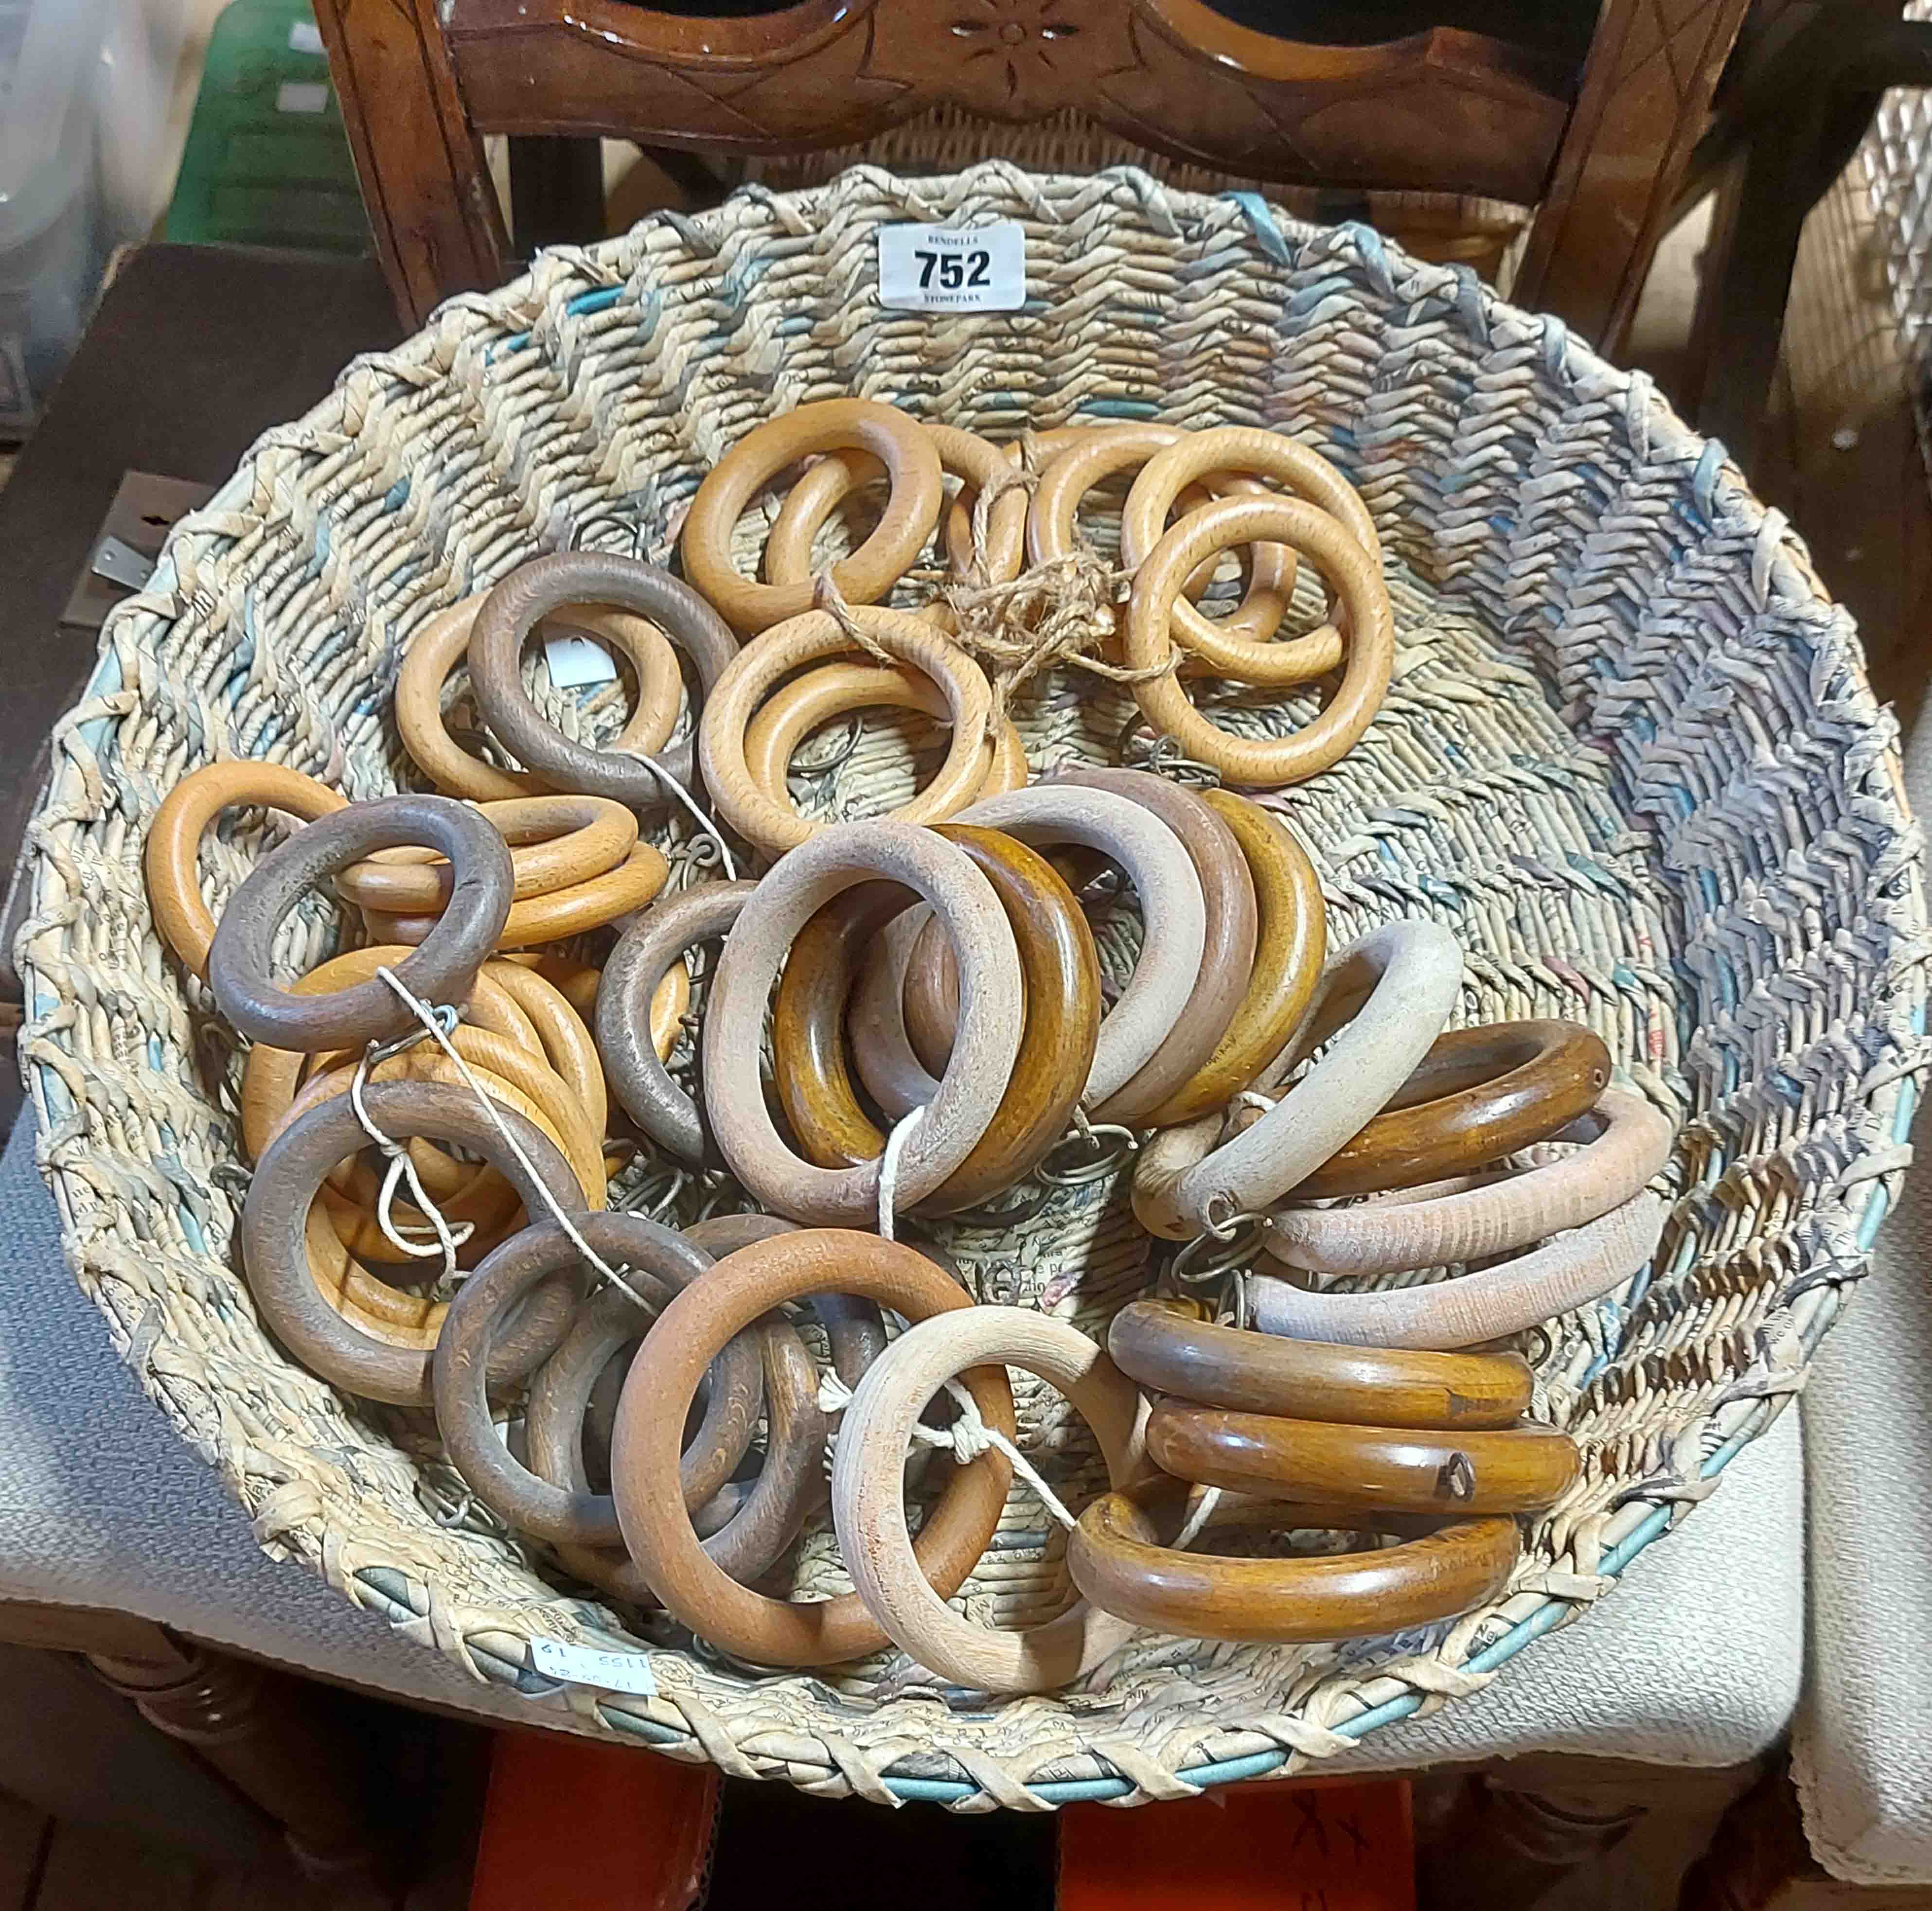 A woven basket containing a quantity of curtain rings